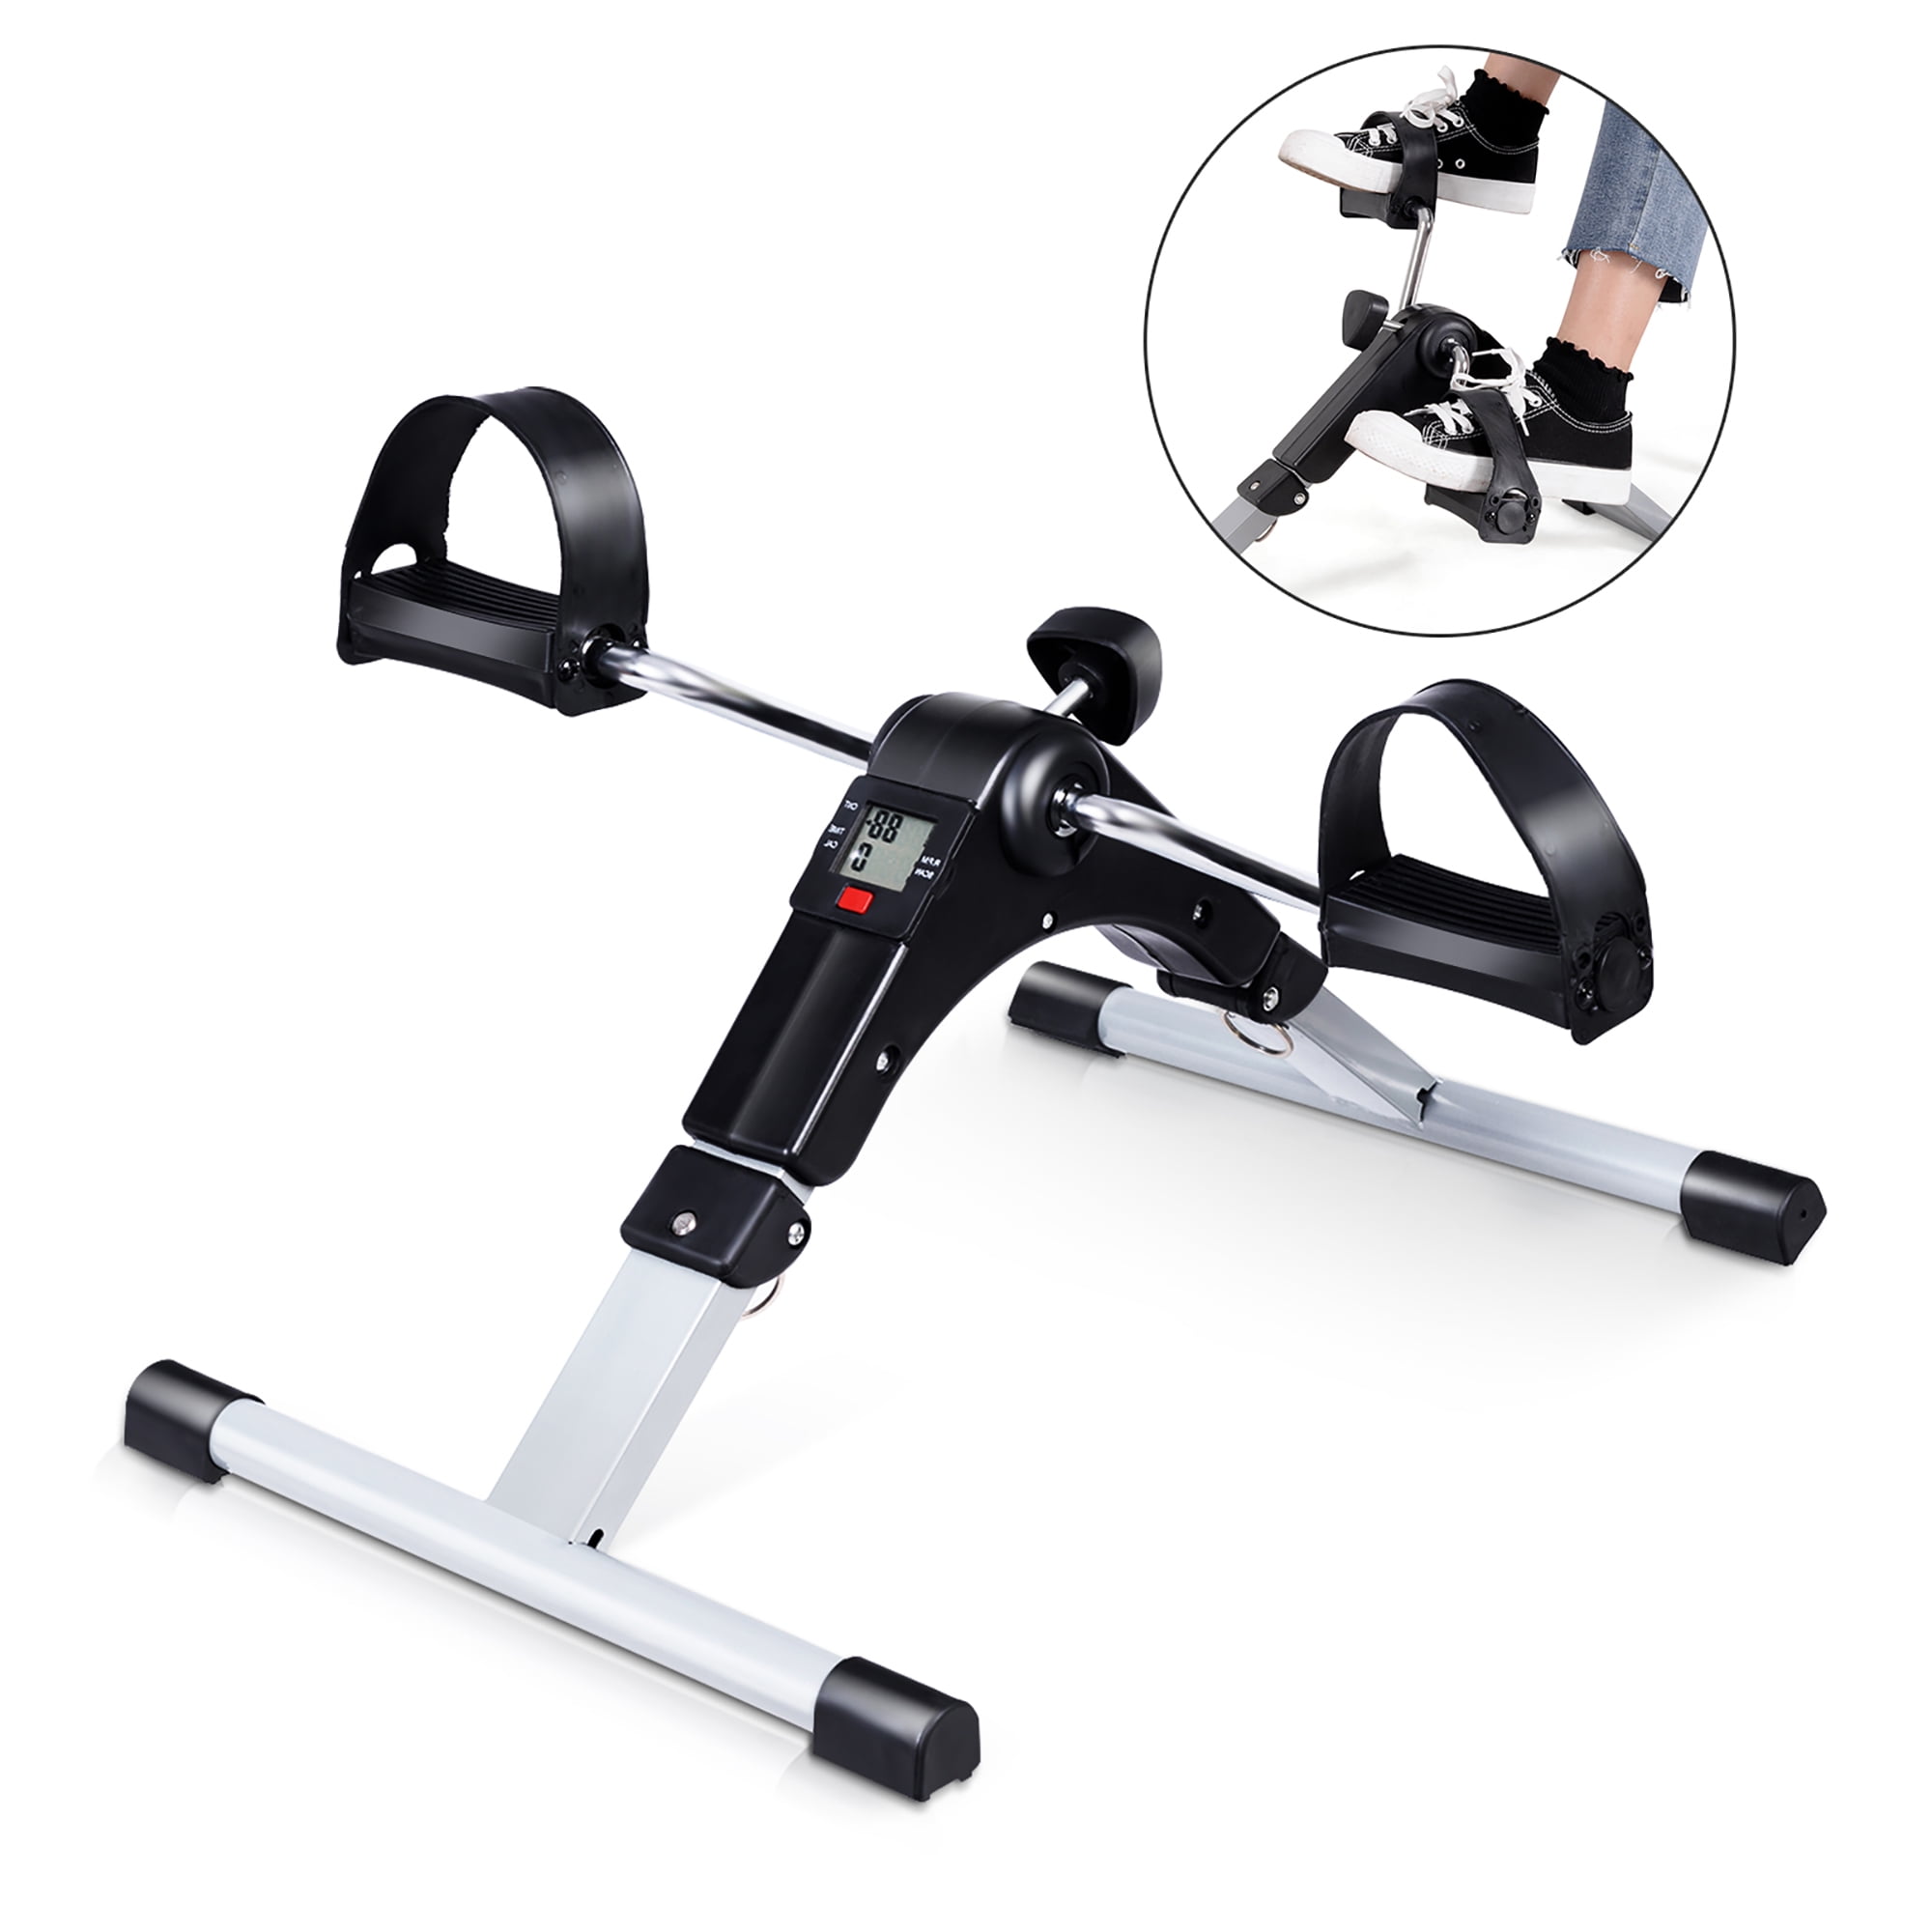 Portable Mini Exercise Bike Pedal Manual Arms Legs Exerciser Machine Indoor Home 